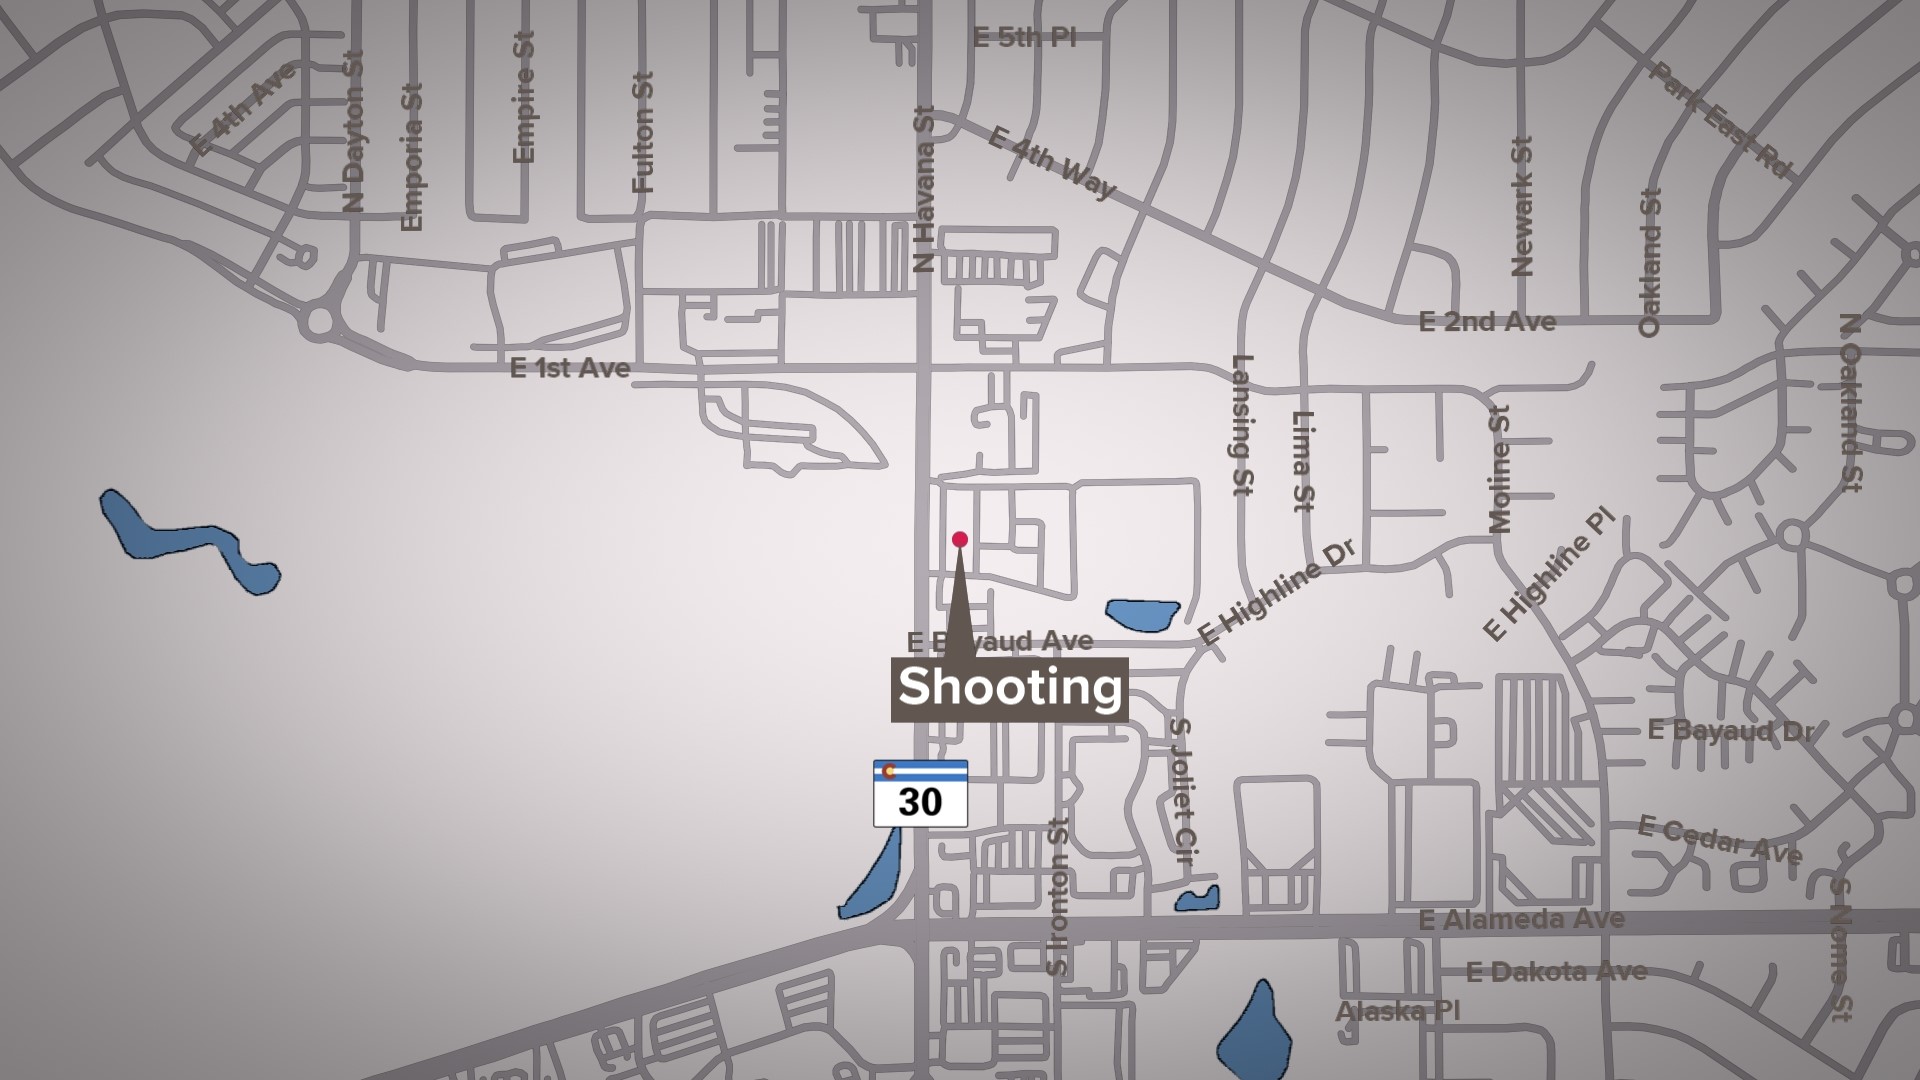 Police said one man was shot in a parking lot and another man was hit by a stray bullet about a block away.